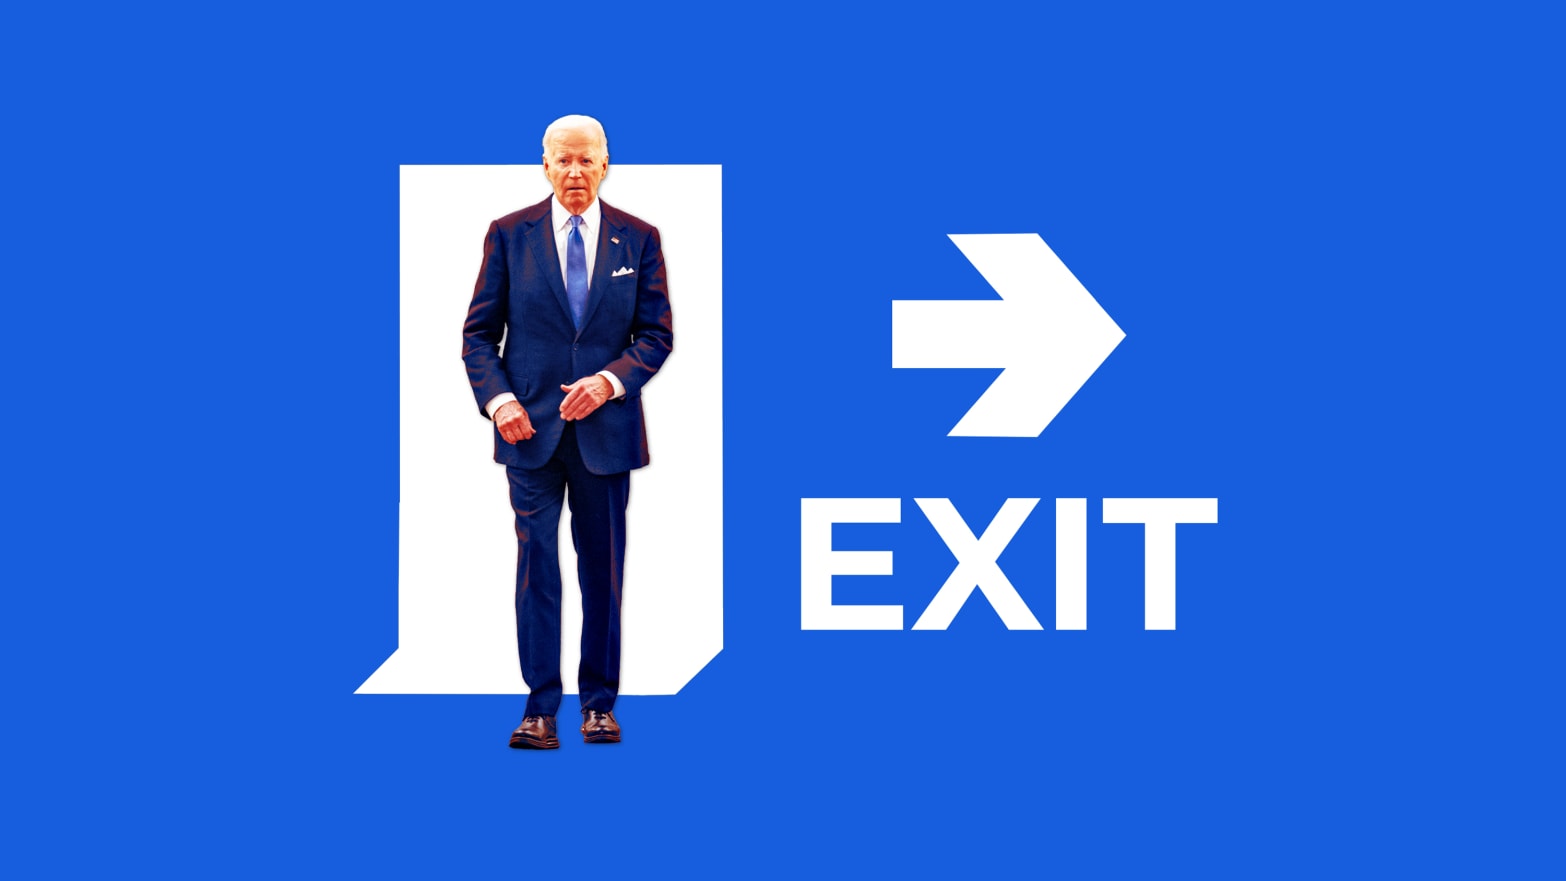 A photo illustration of President Biden and an Exit sign.